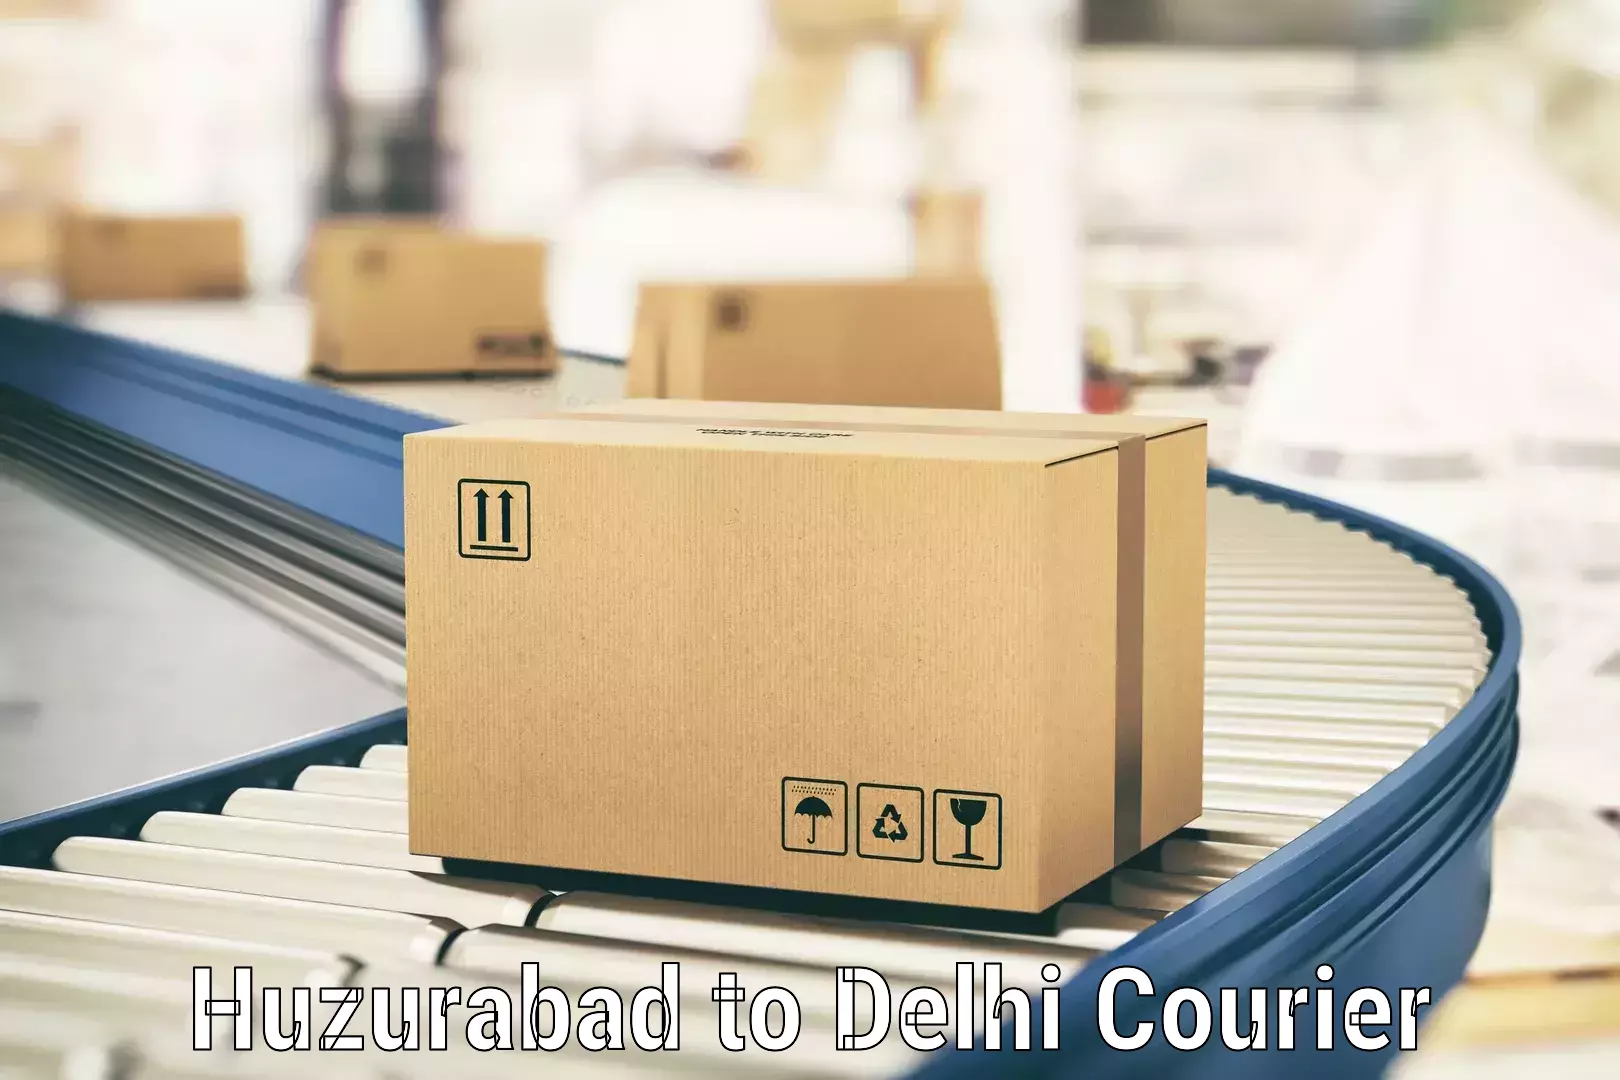 Efficient package consolidation Huzurabad to Lodhi Road